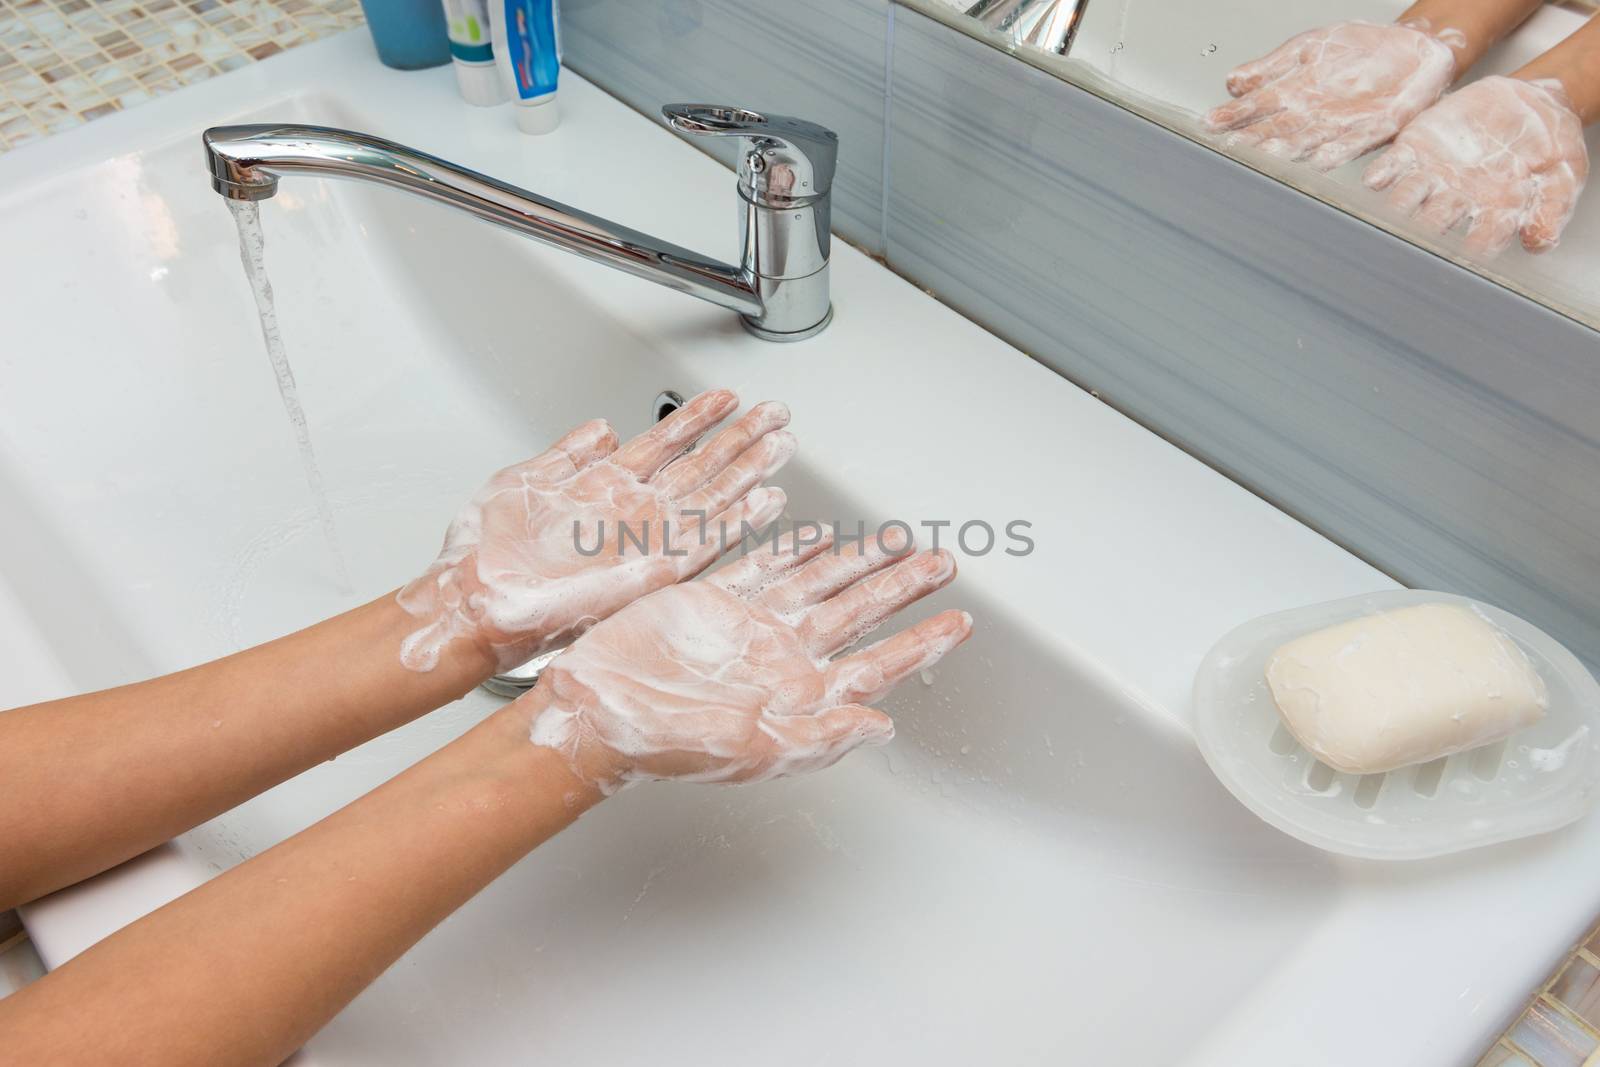 Child shows soaped hands